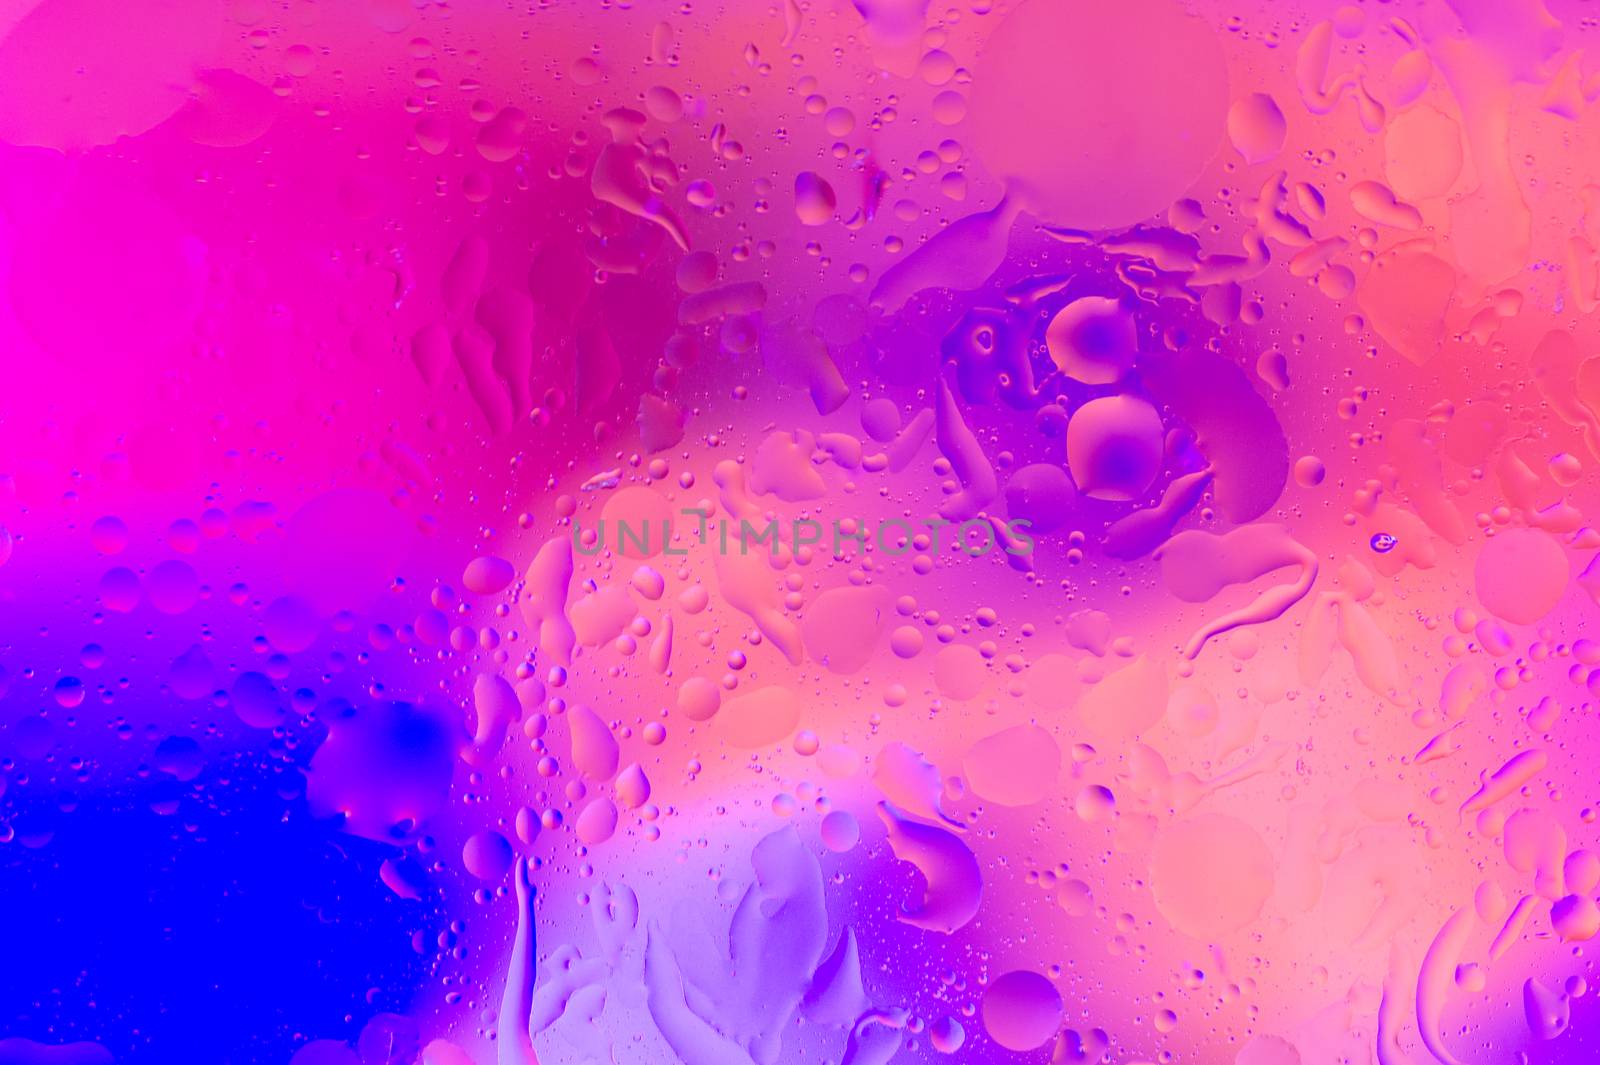 The hue purple abstract composition of oil drops in water with soft focus effect.